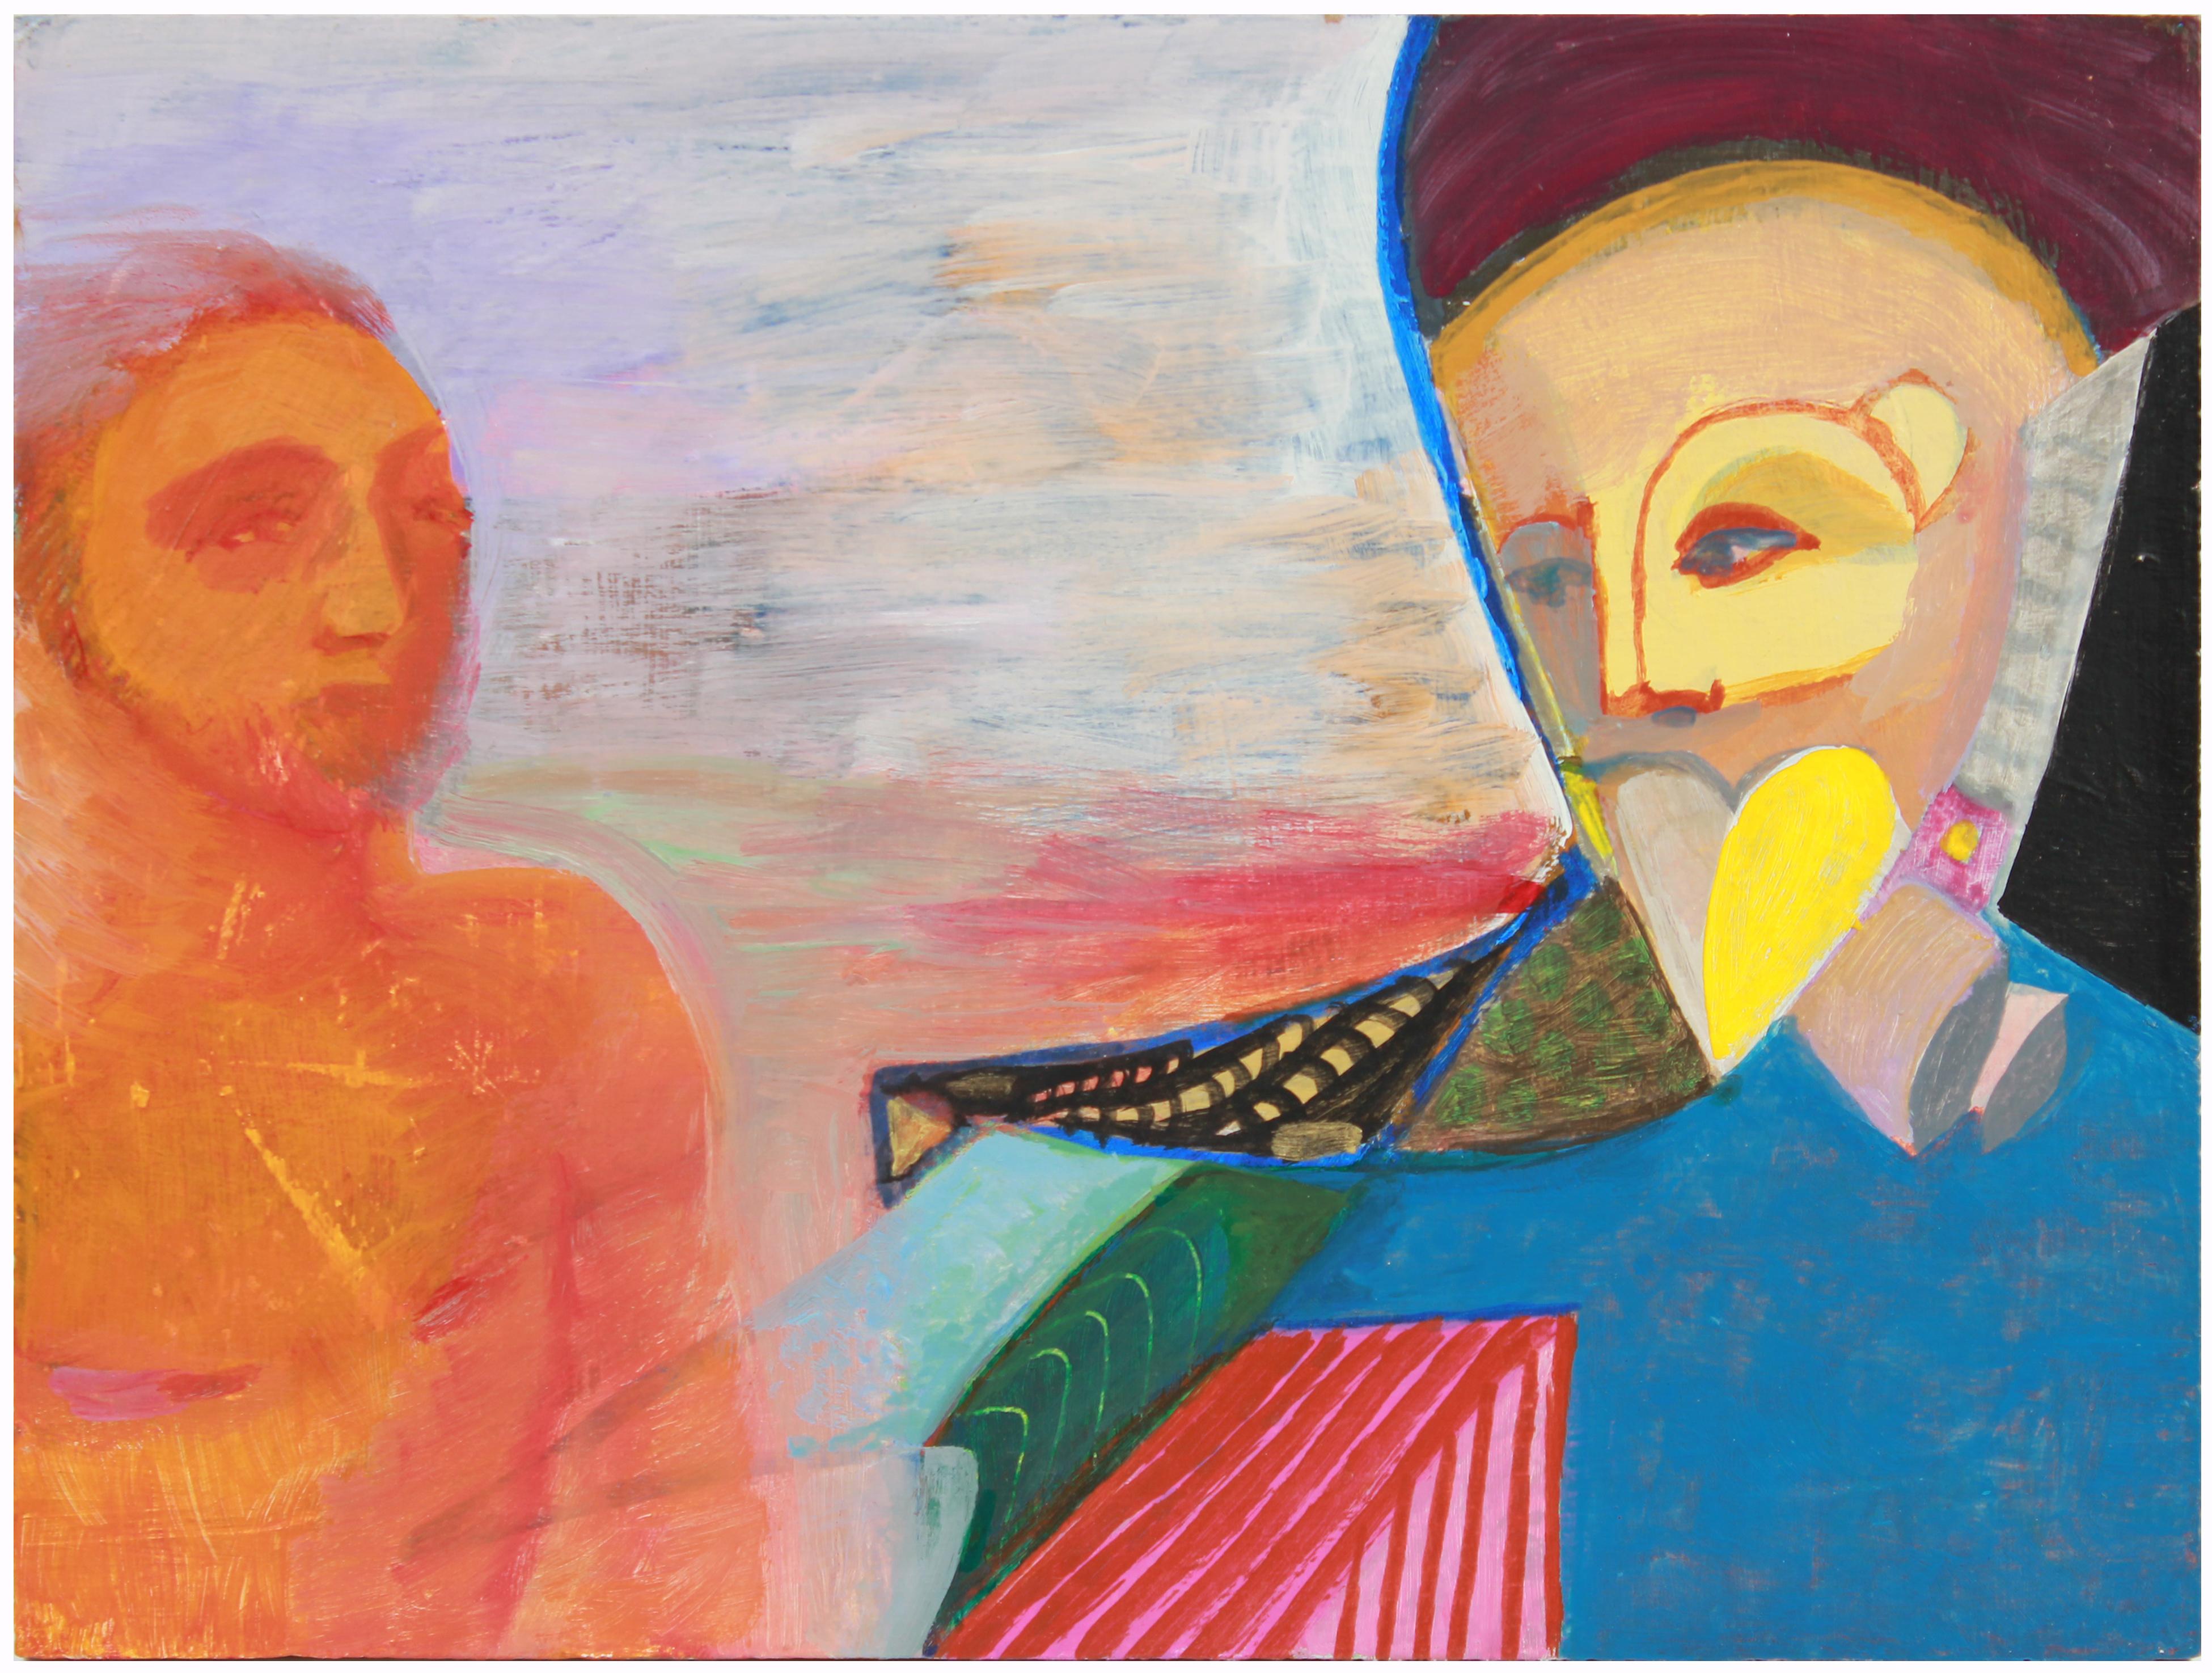 Colorful Surrealist Figures in Oil with Blue, Orange & Red, October 10, 1995 - Painting by Michael di Cosola